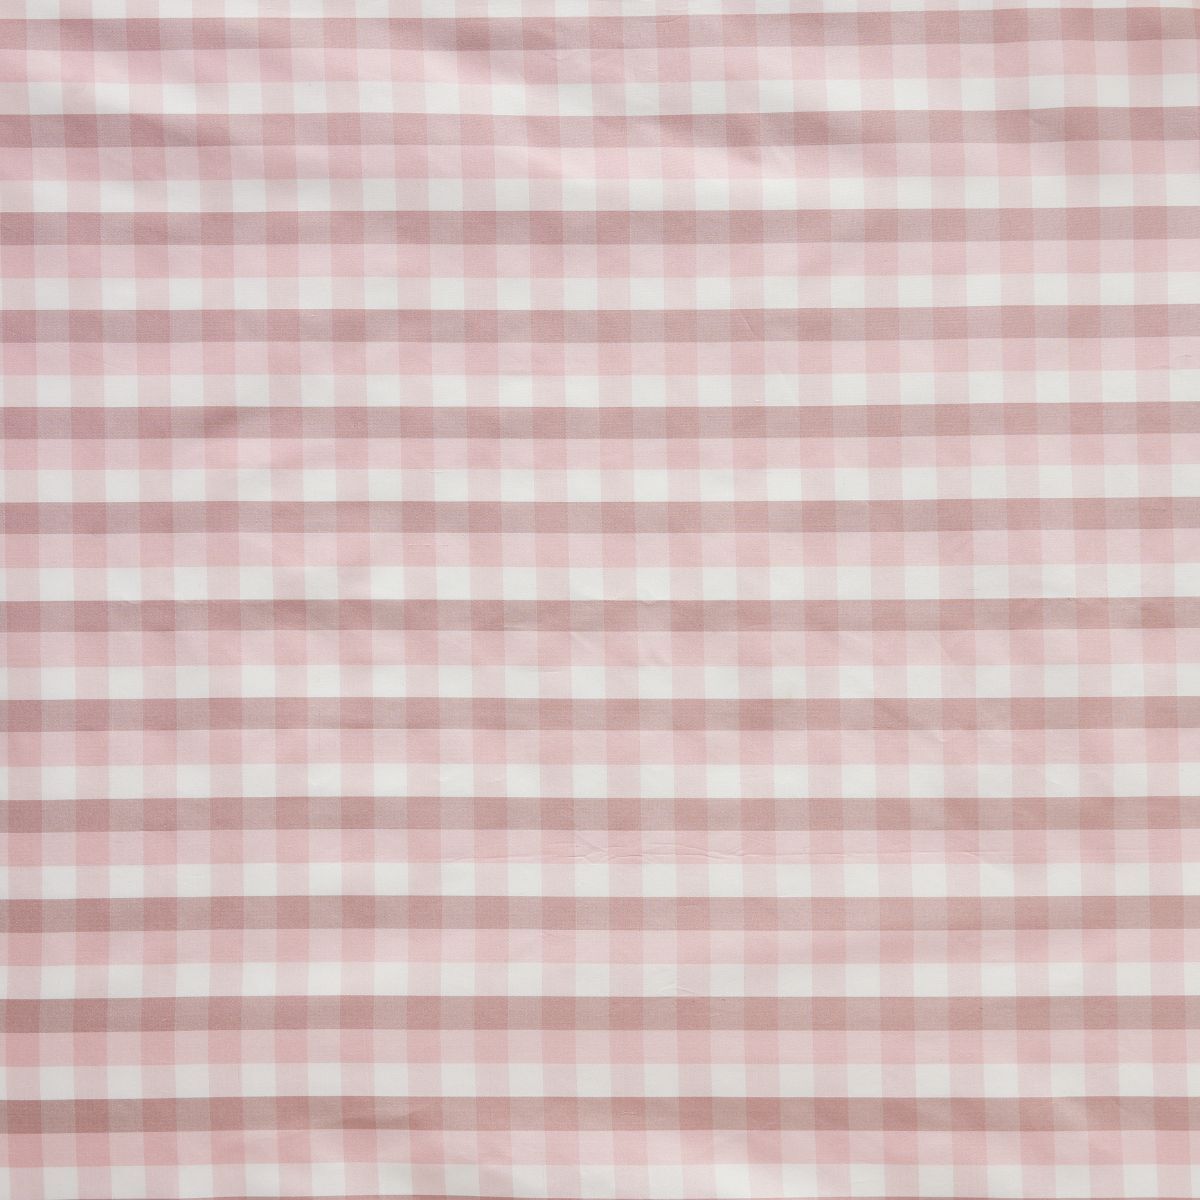 Vichy Check in Blush Fabric Swatch